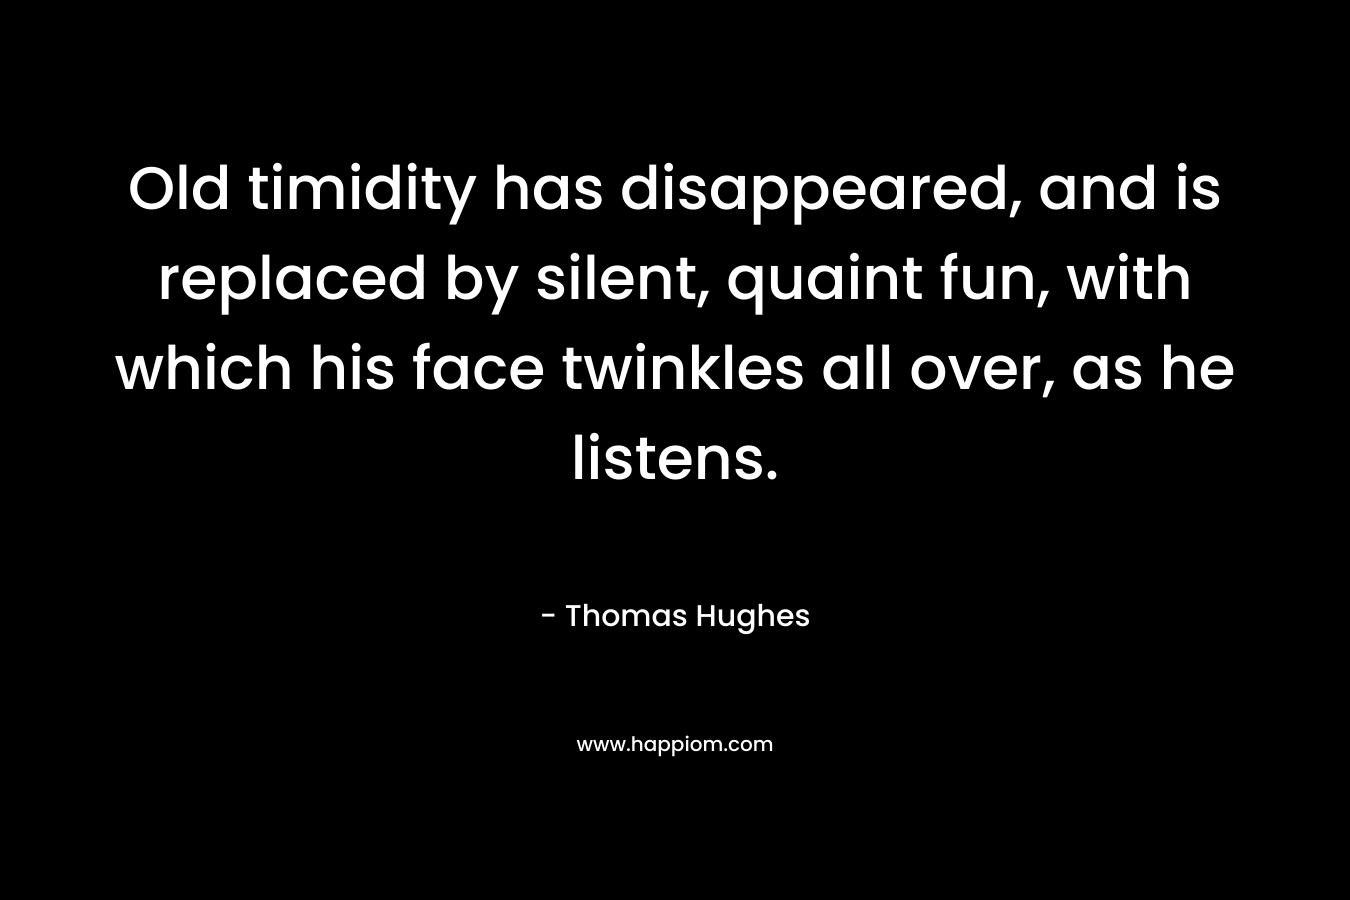 Old timidity has disappeared, and is replaced by silent, quaint fun, with which his face twinkles all over, as he listens. – Thomas Hughes